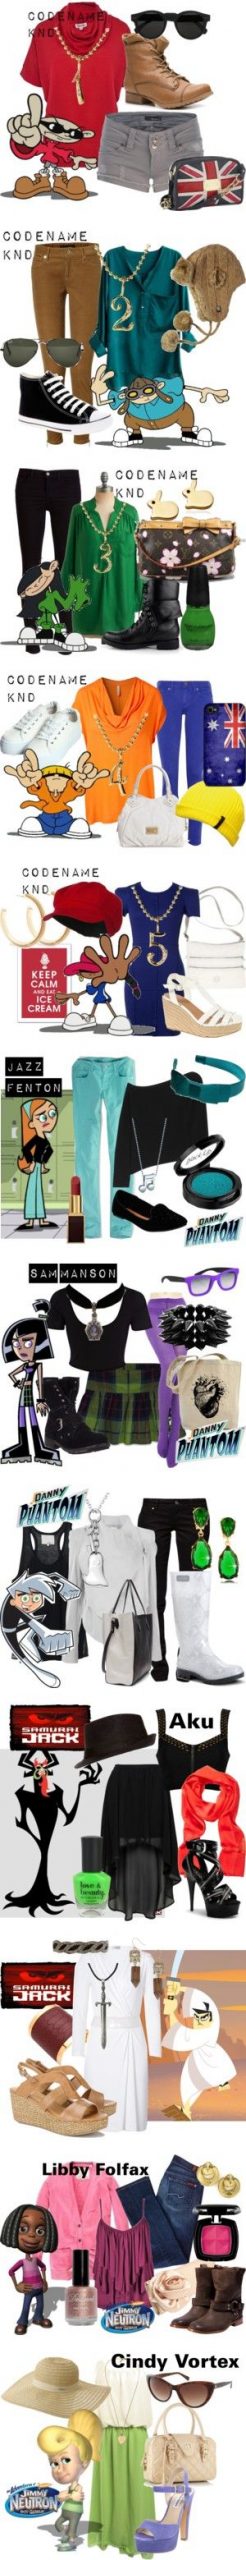 “90s Cartoons” by lilyelizajane ❤ liked on Polyvore